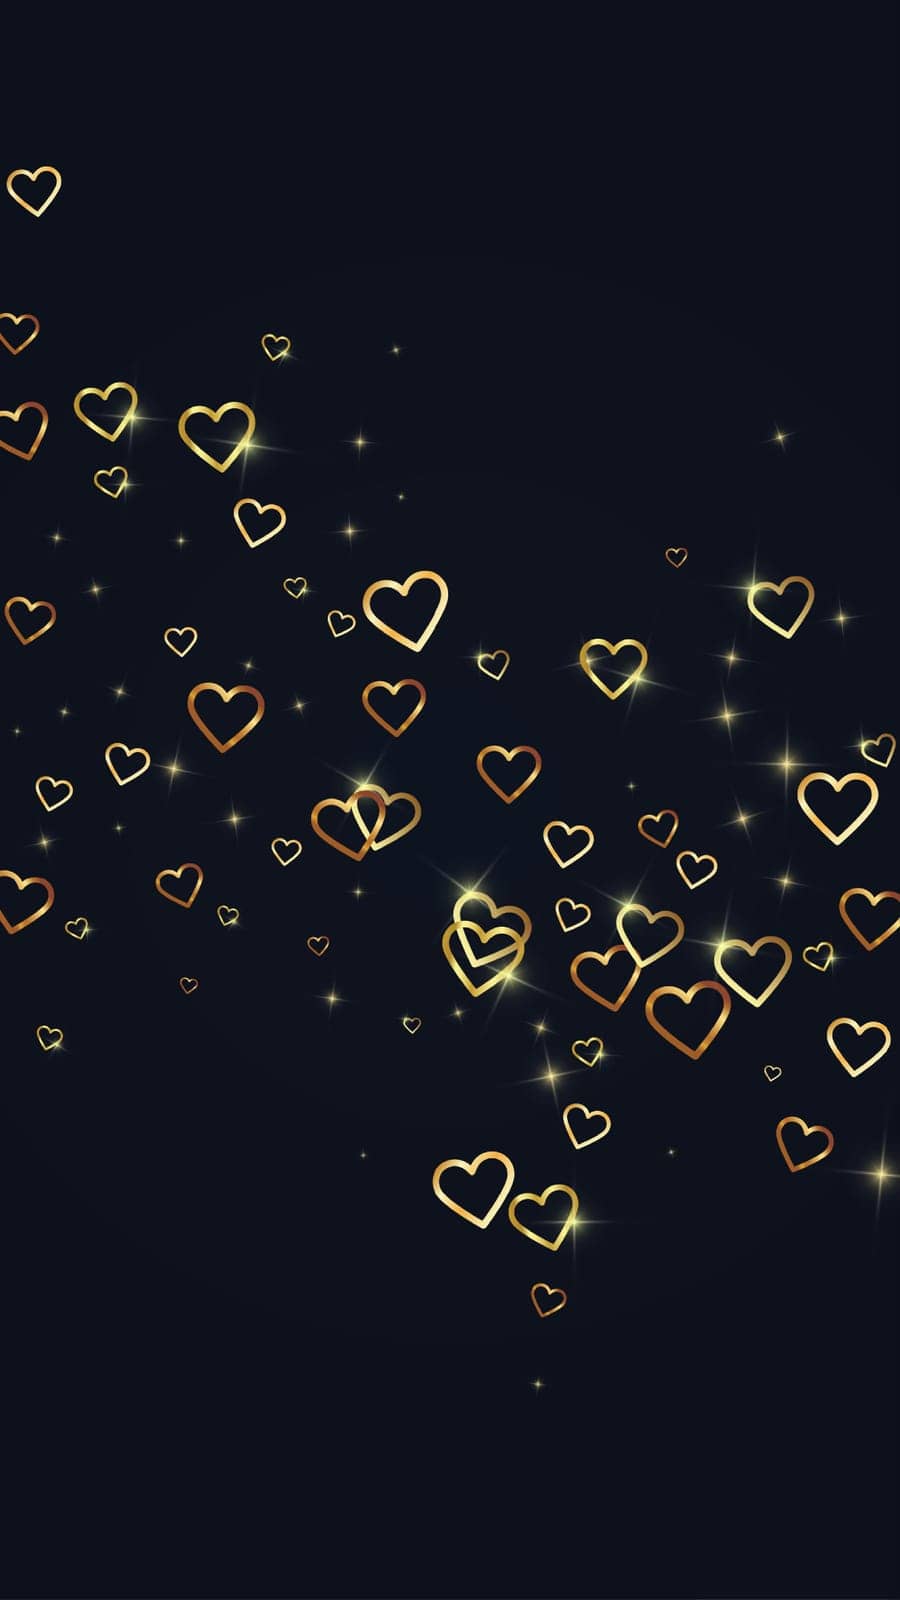 Gold hearts scattered on black background. by beginagain